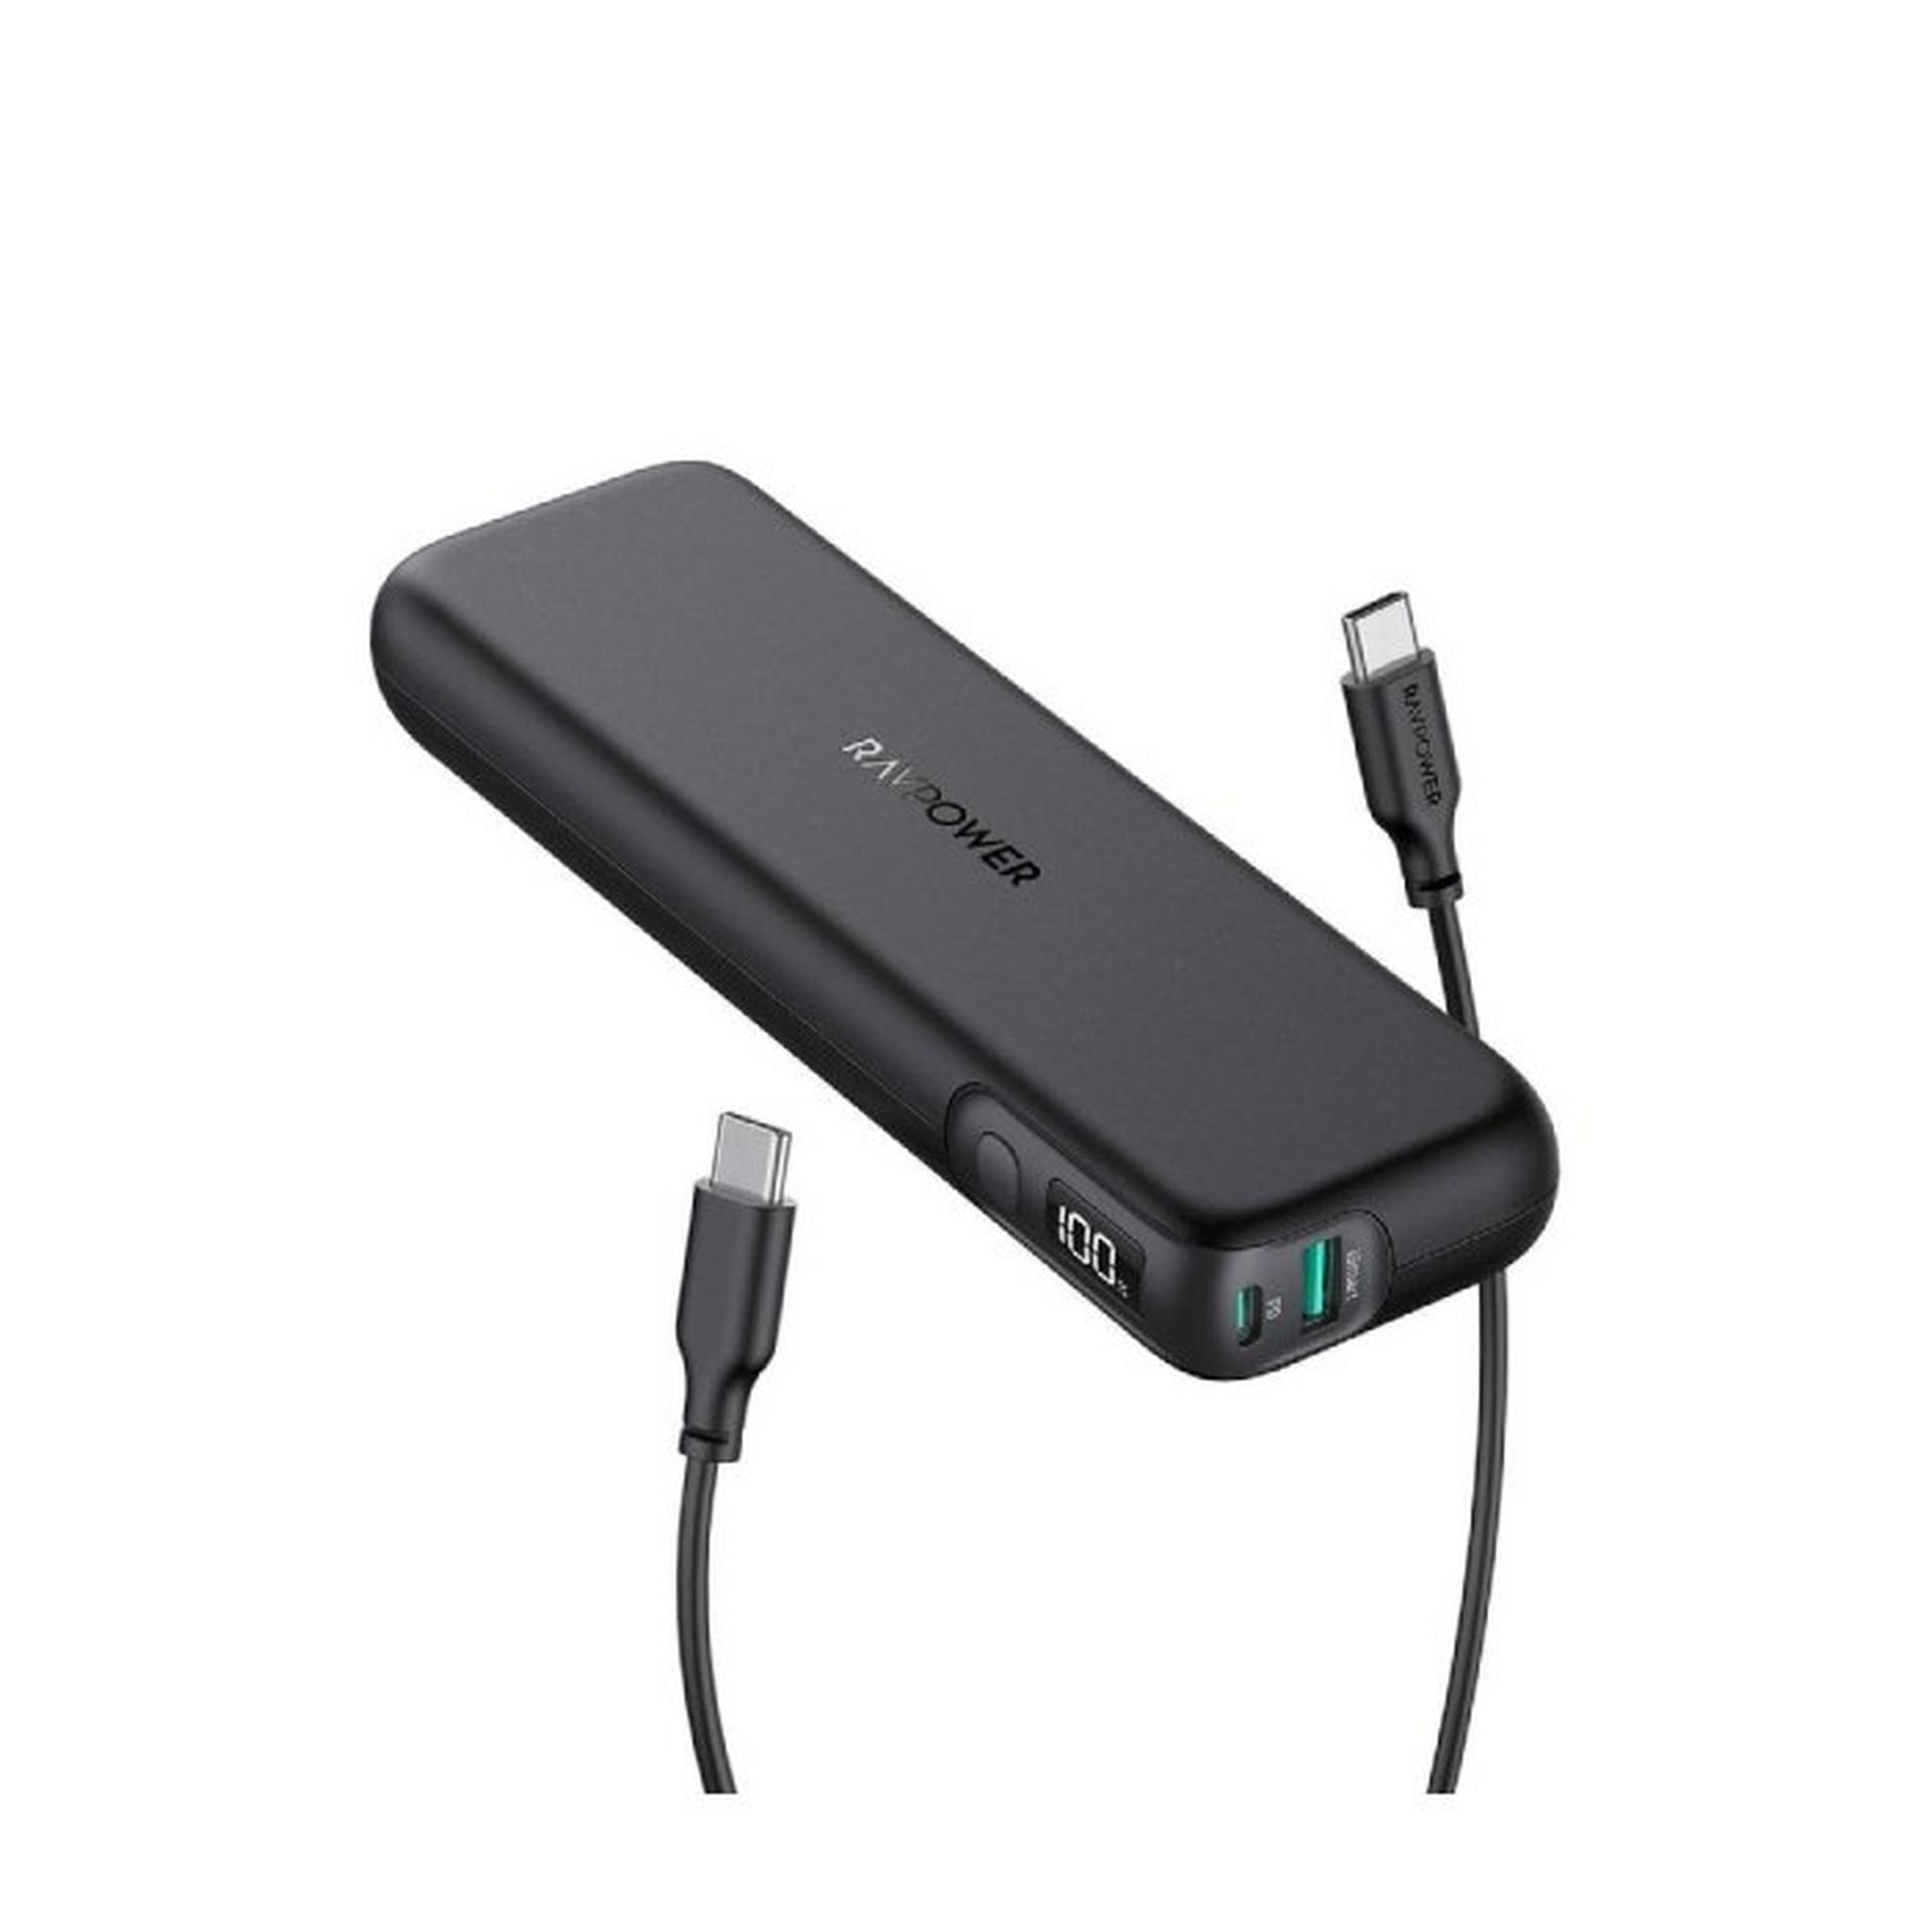 RAVPower PD Pioneer 15000 mAh 30w 2 Ports Portable Charger - Black